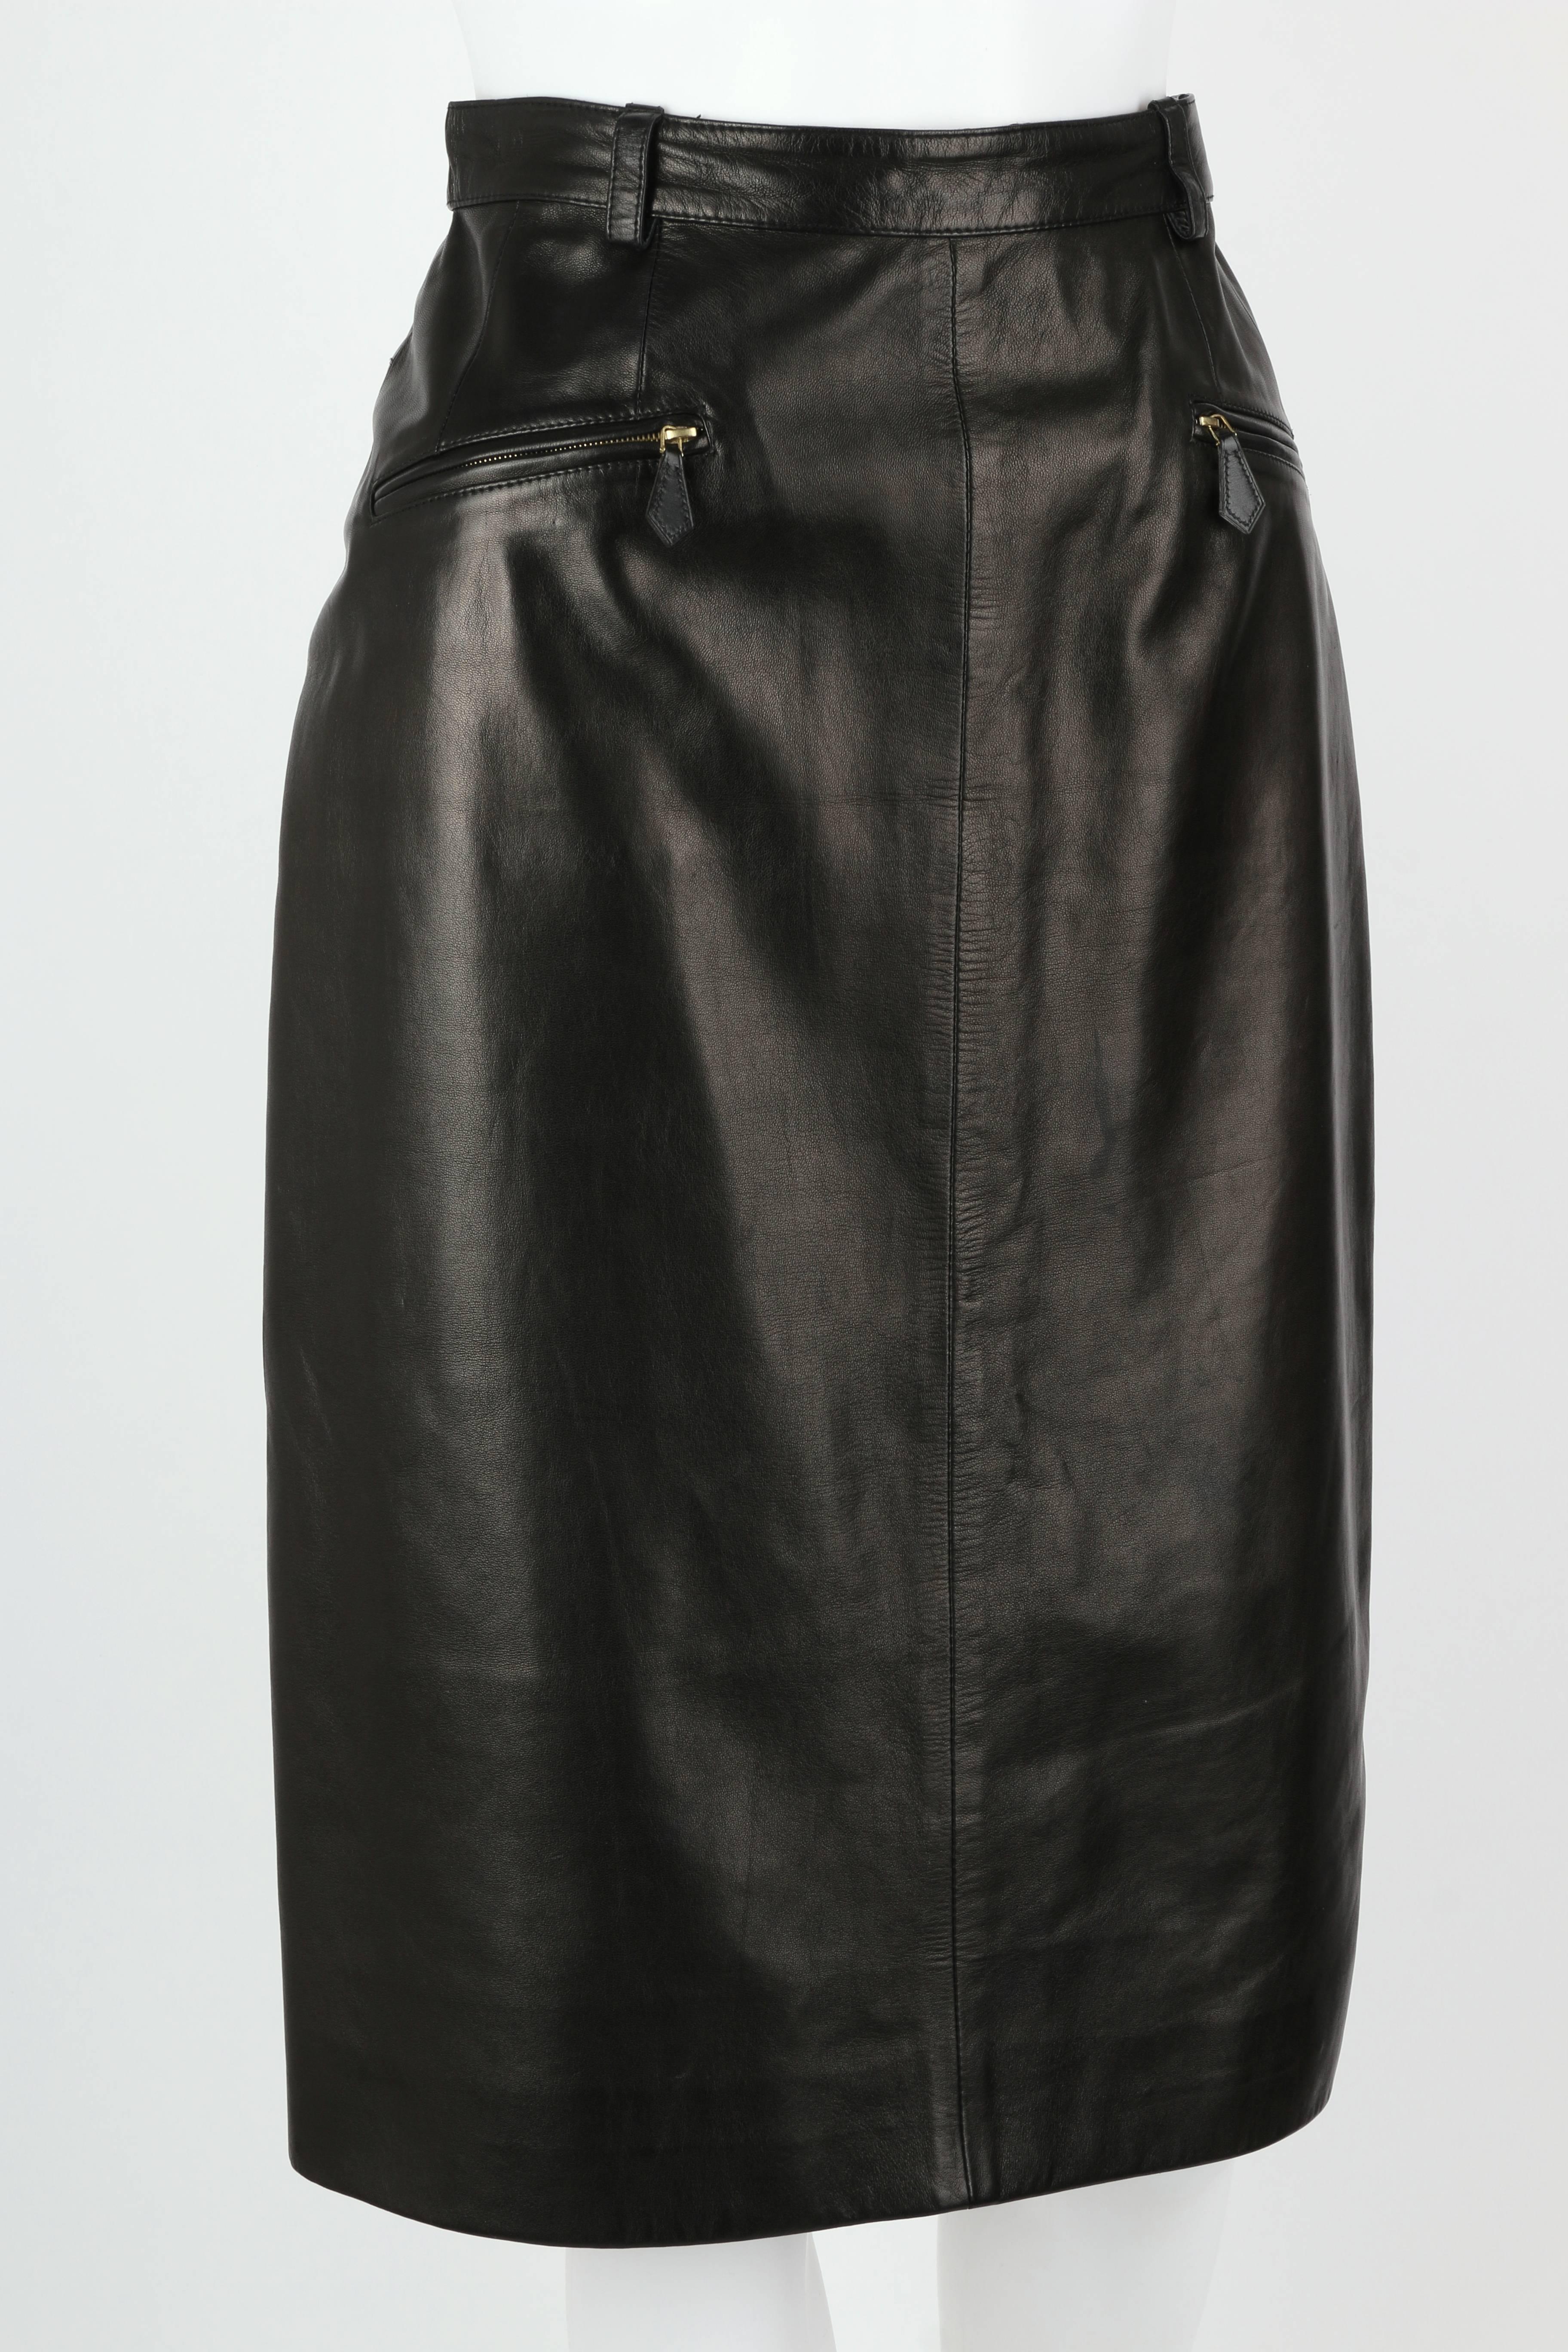 Vintage c.1990's Hermes black genuine lambskin leather pencil skirt. Two front zipper pockets. Belt loops around waist. Hidden zipper and button closure at hip. Back kick pleat. Above the knee length. Fully lined. Please note this item was pinned to